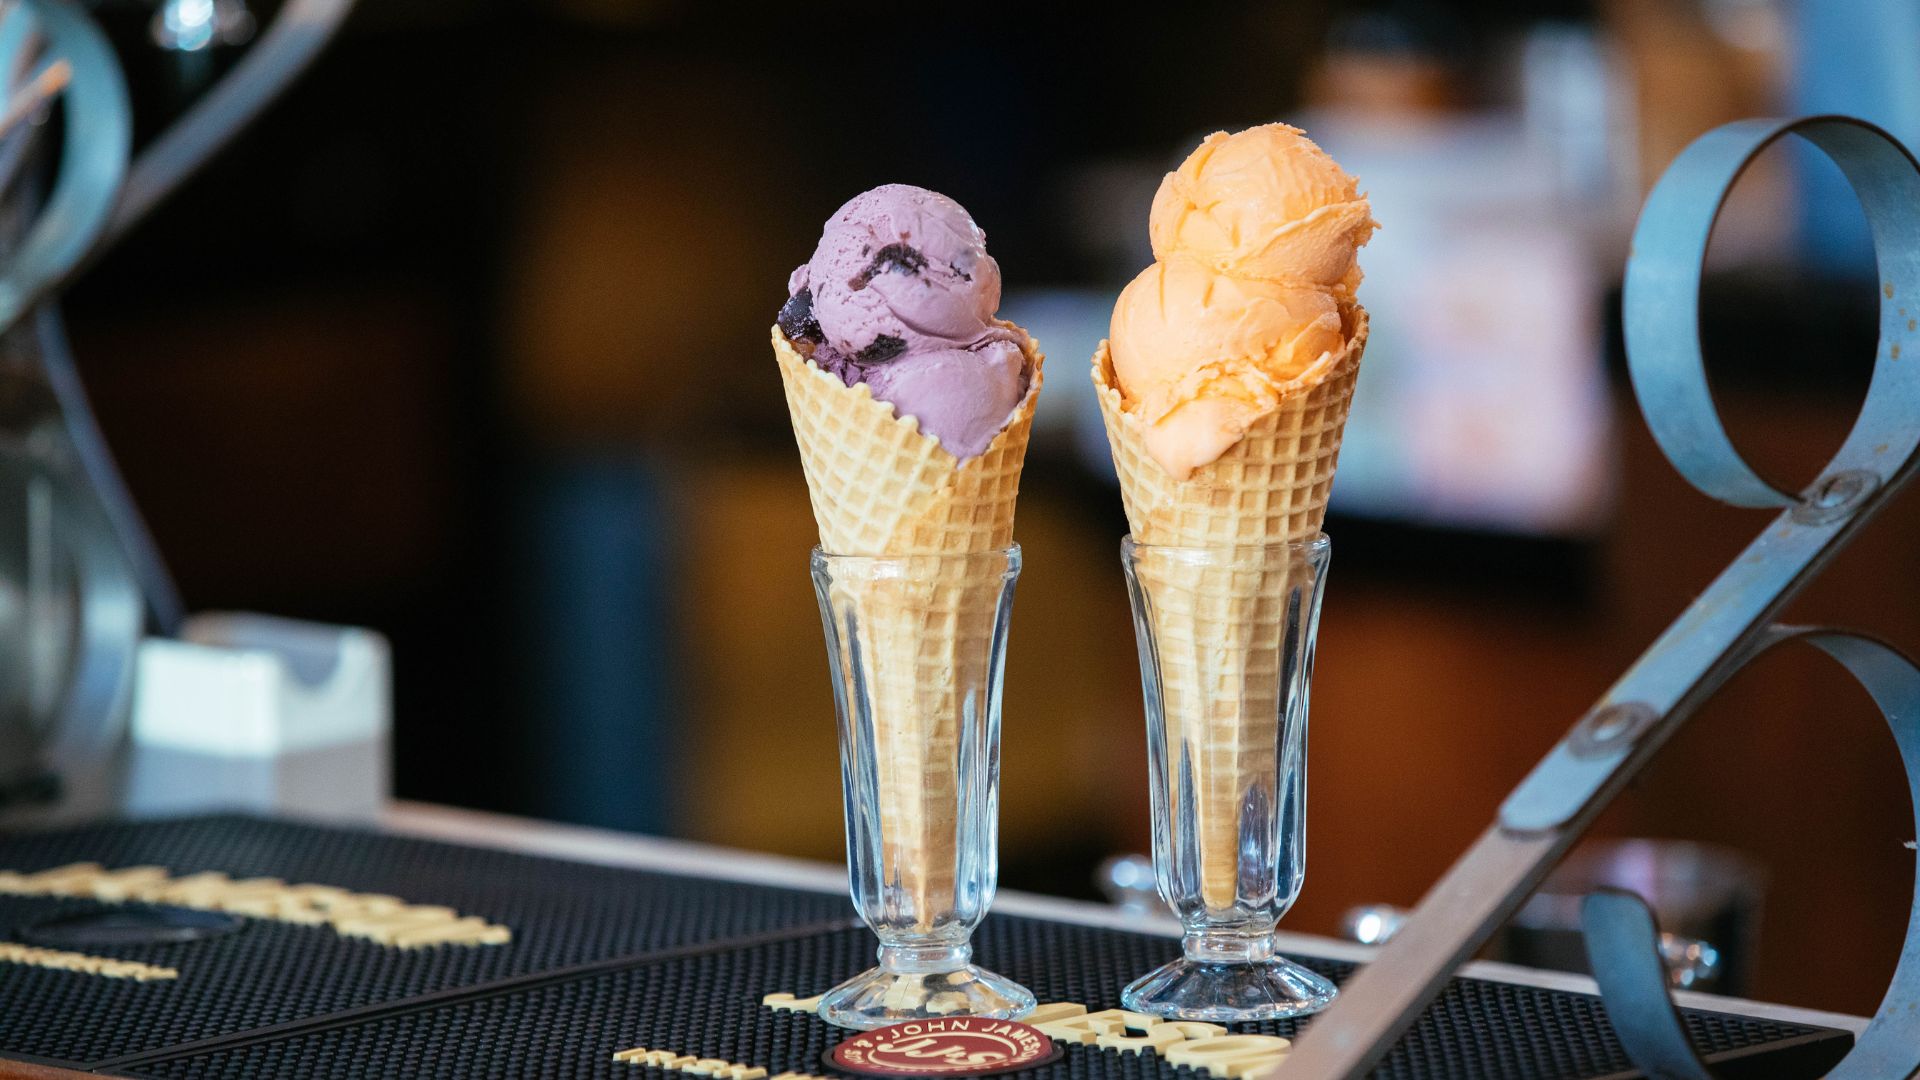 The Fountain on Locust serves scoops of ice cream any way you like.